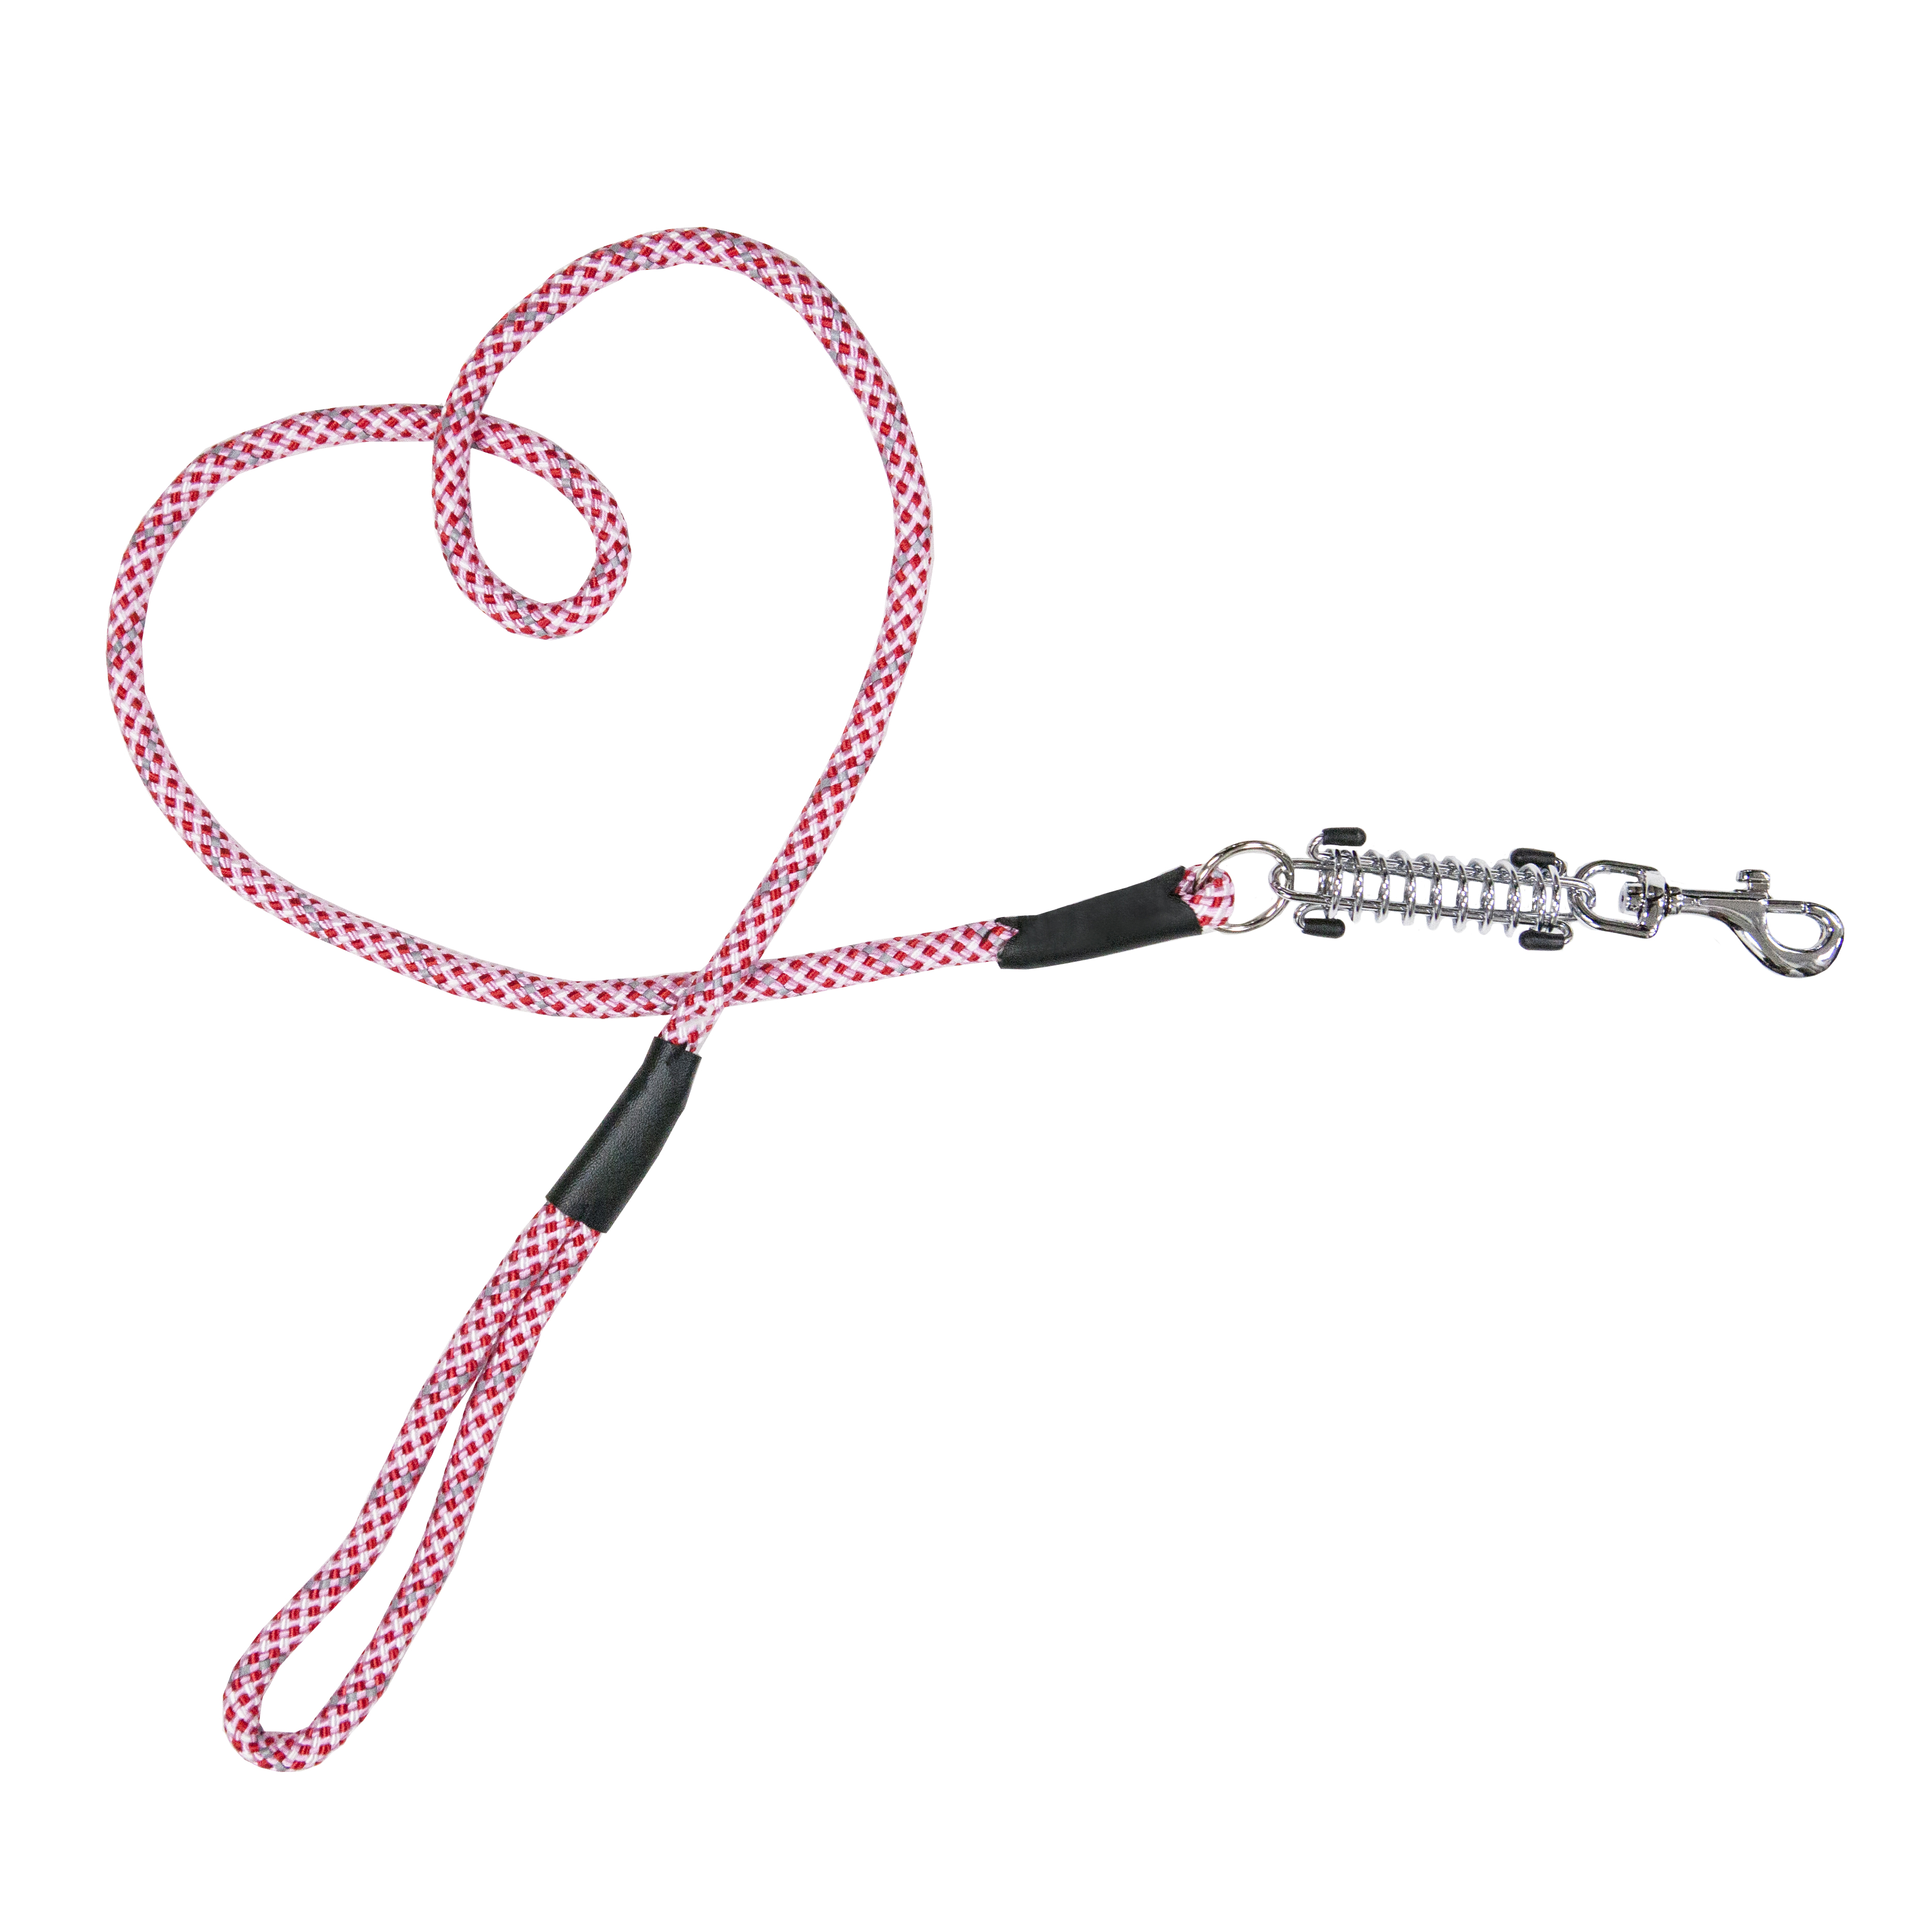 Petique Kandy Kane Reflectiful Leash with Shock Absorber